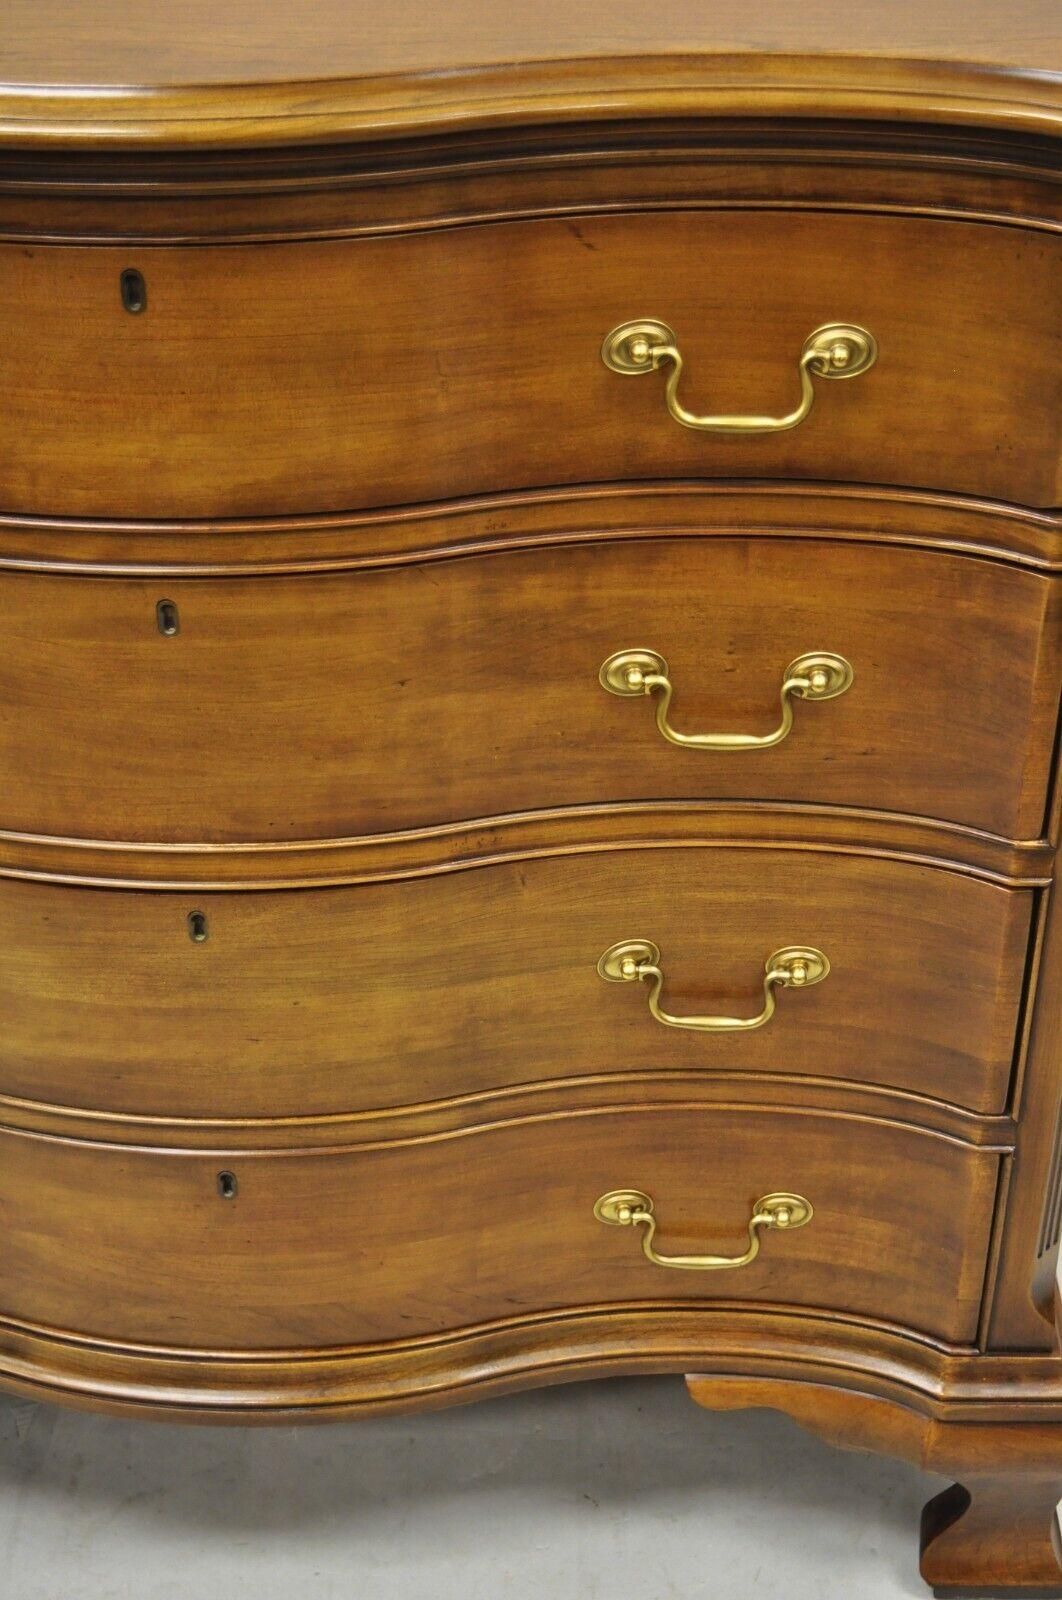 Chippendale Century Furn, American Life Collection Henry Ford Museum Cherry 4 Drawer Chest